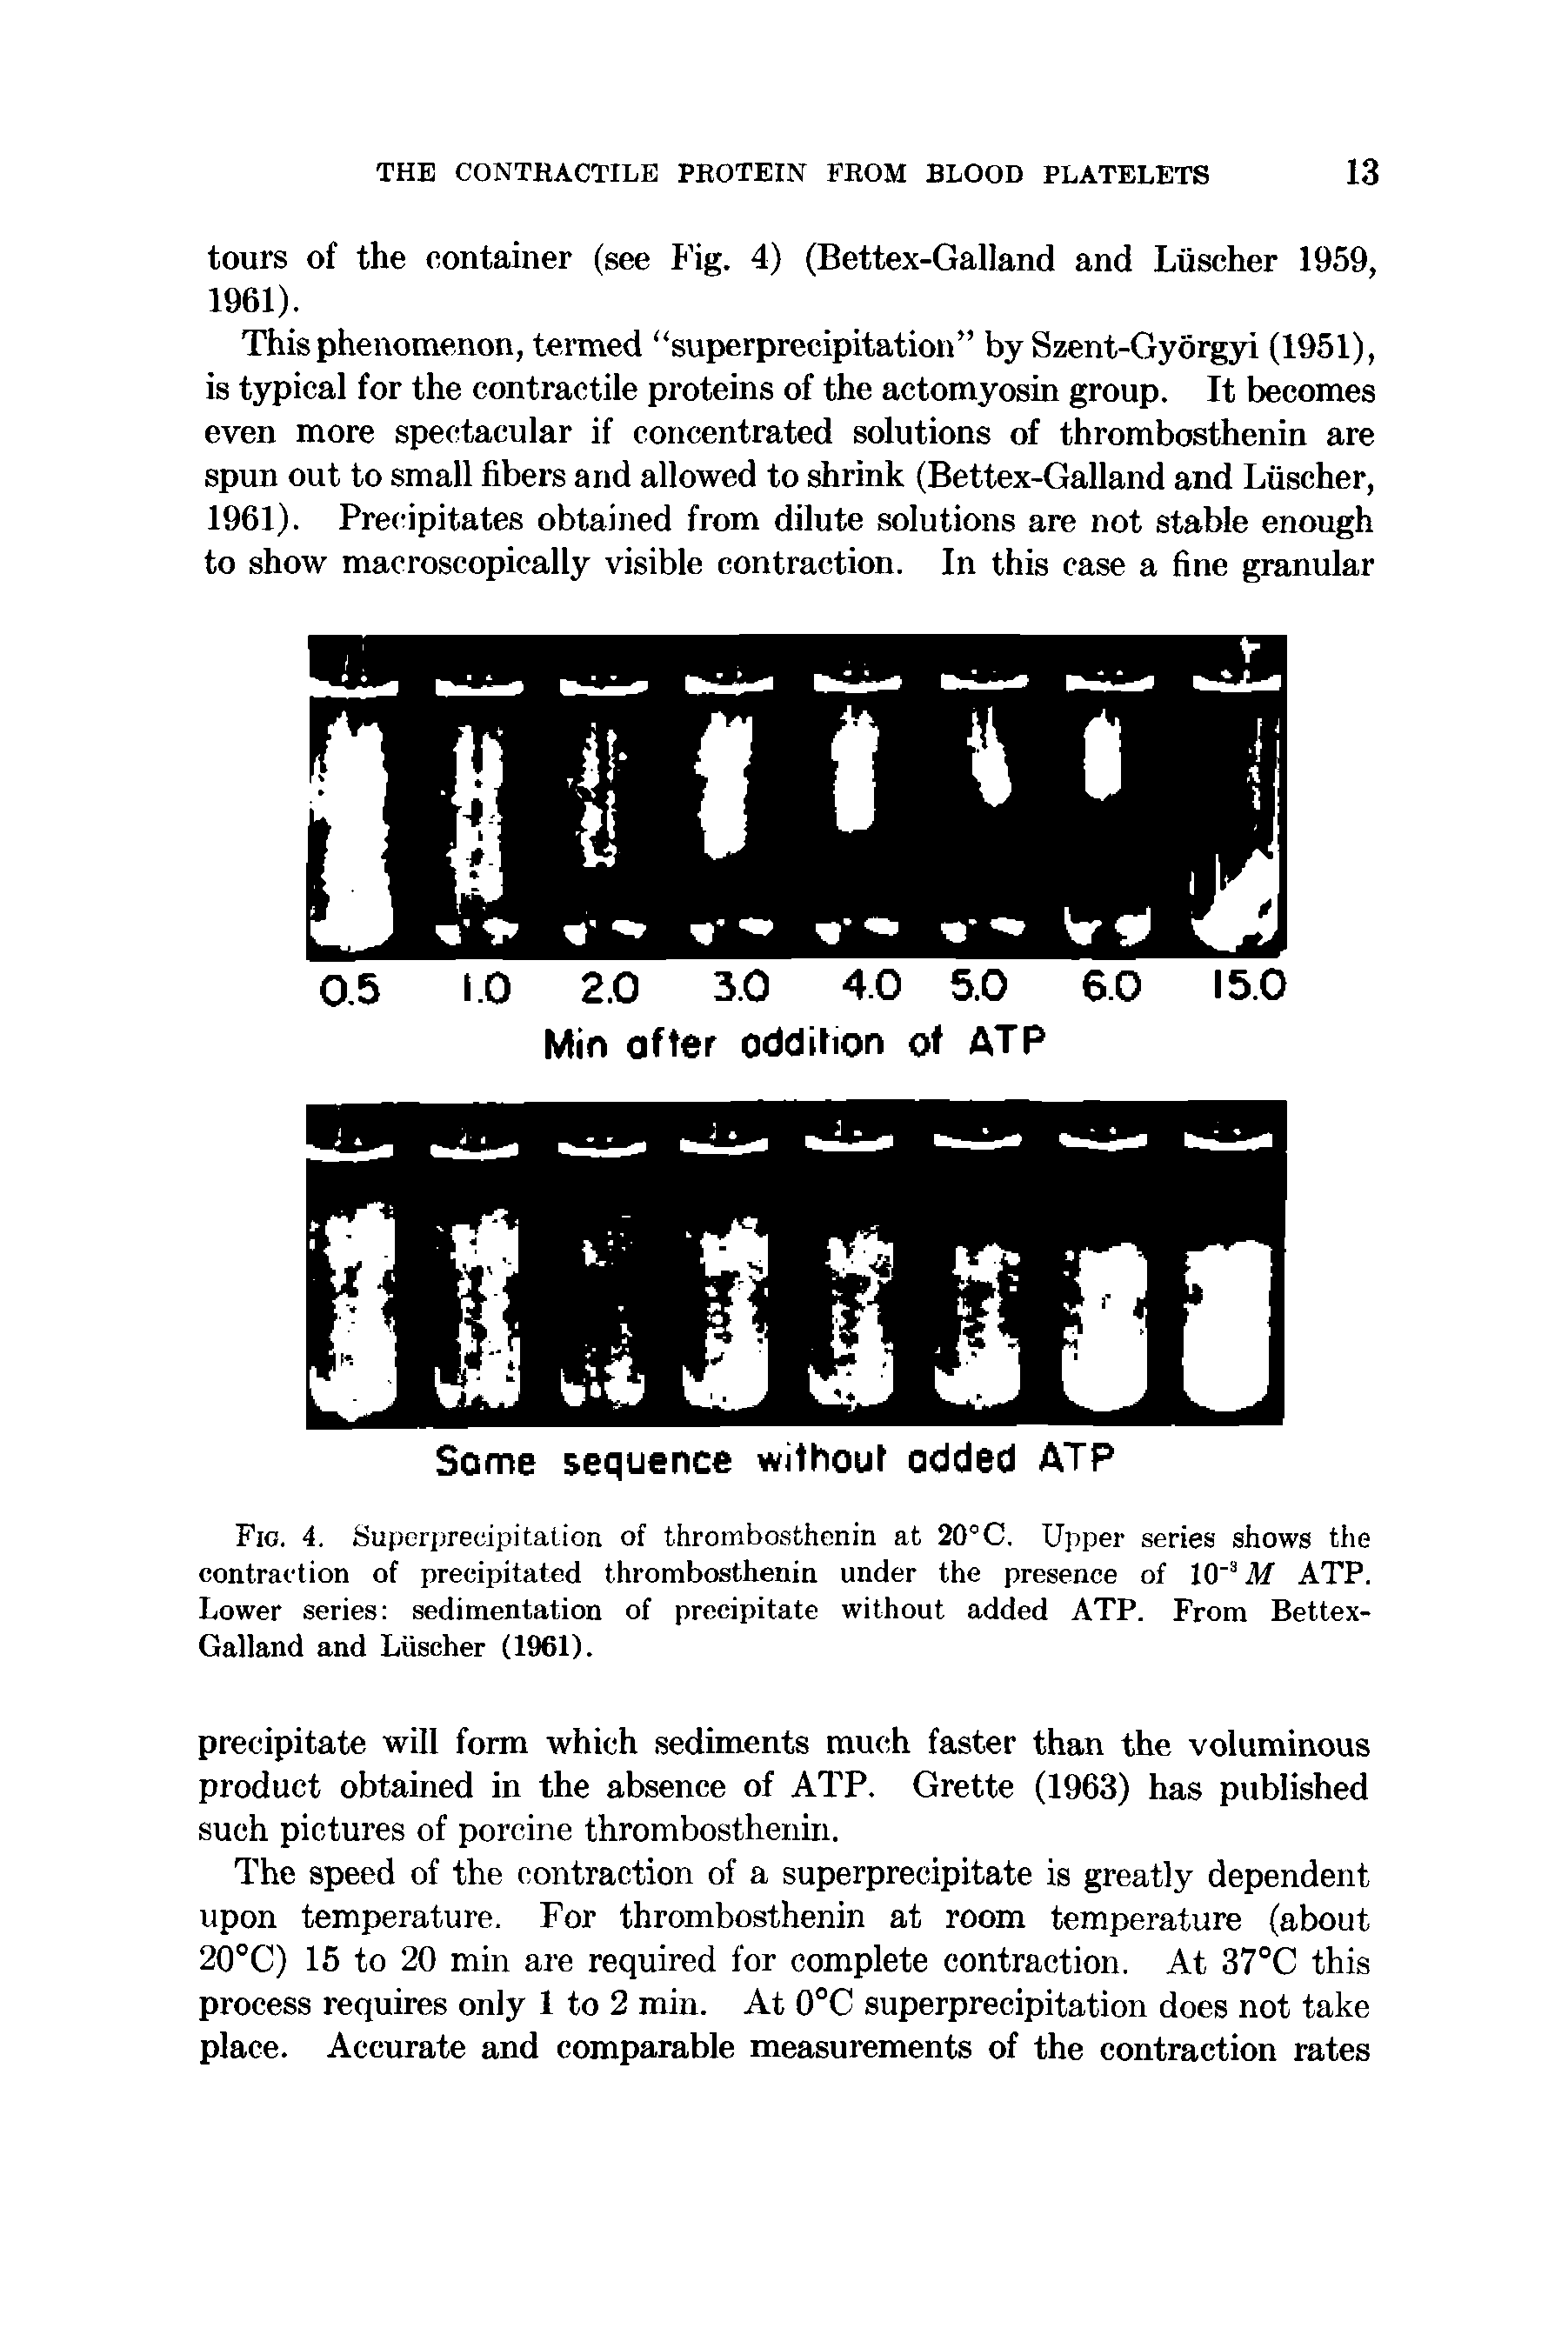 Fig. 4. Supcrijrecipitation of thrombosthenin at 20°C. Upper series shows the contraction of precipitated thrombosthenin under the presence of 10 M ATP. Lower series sedimentation of precipitate without added ATP. From Bettex-Galland and Luscher (1961).